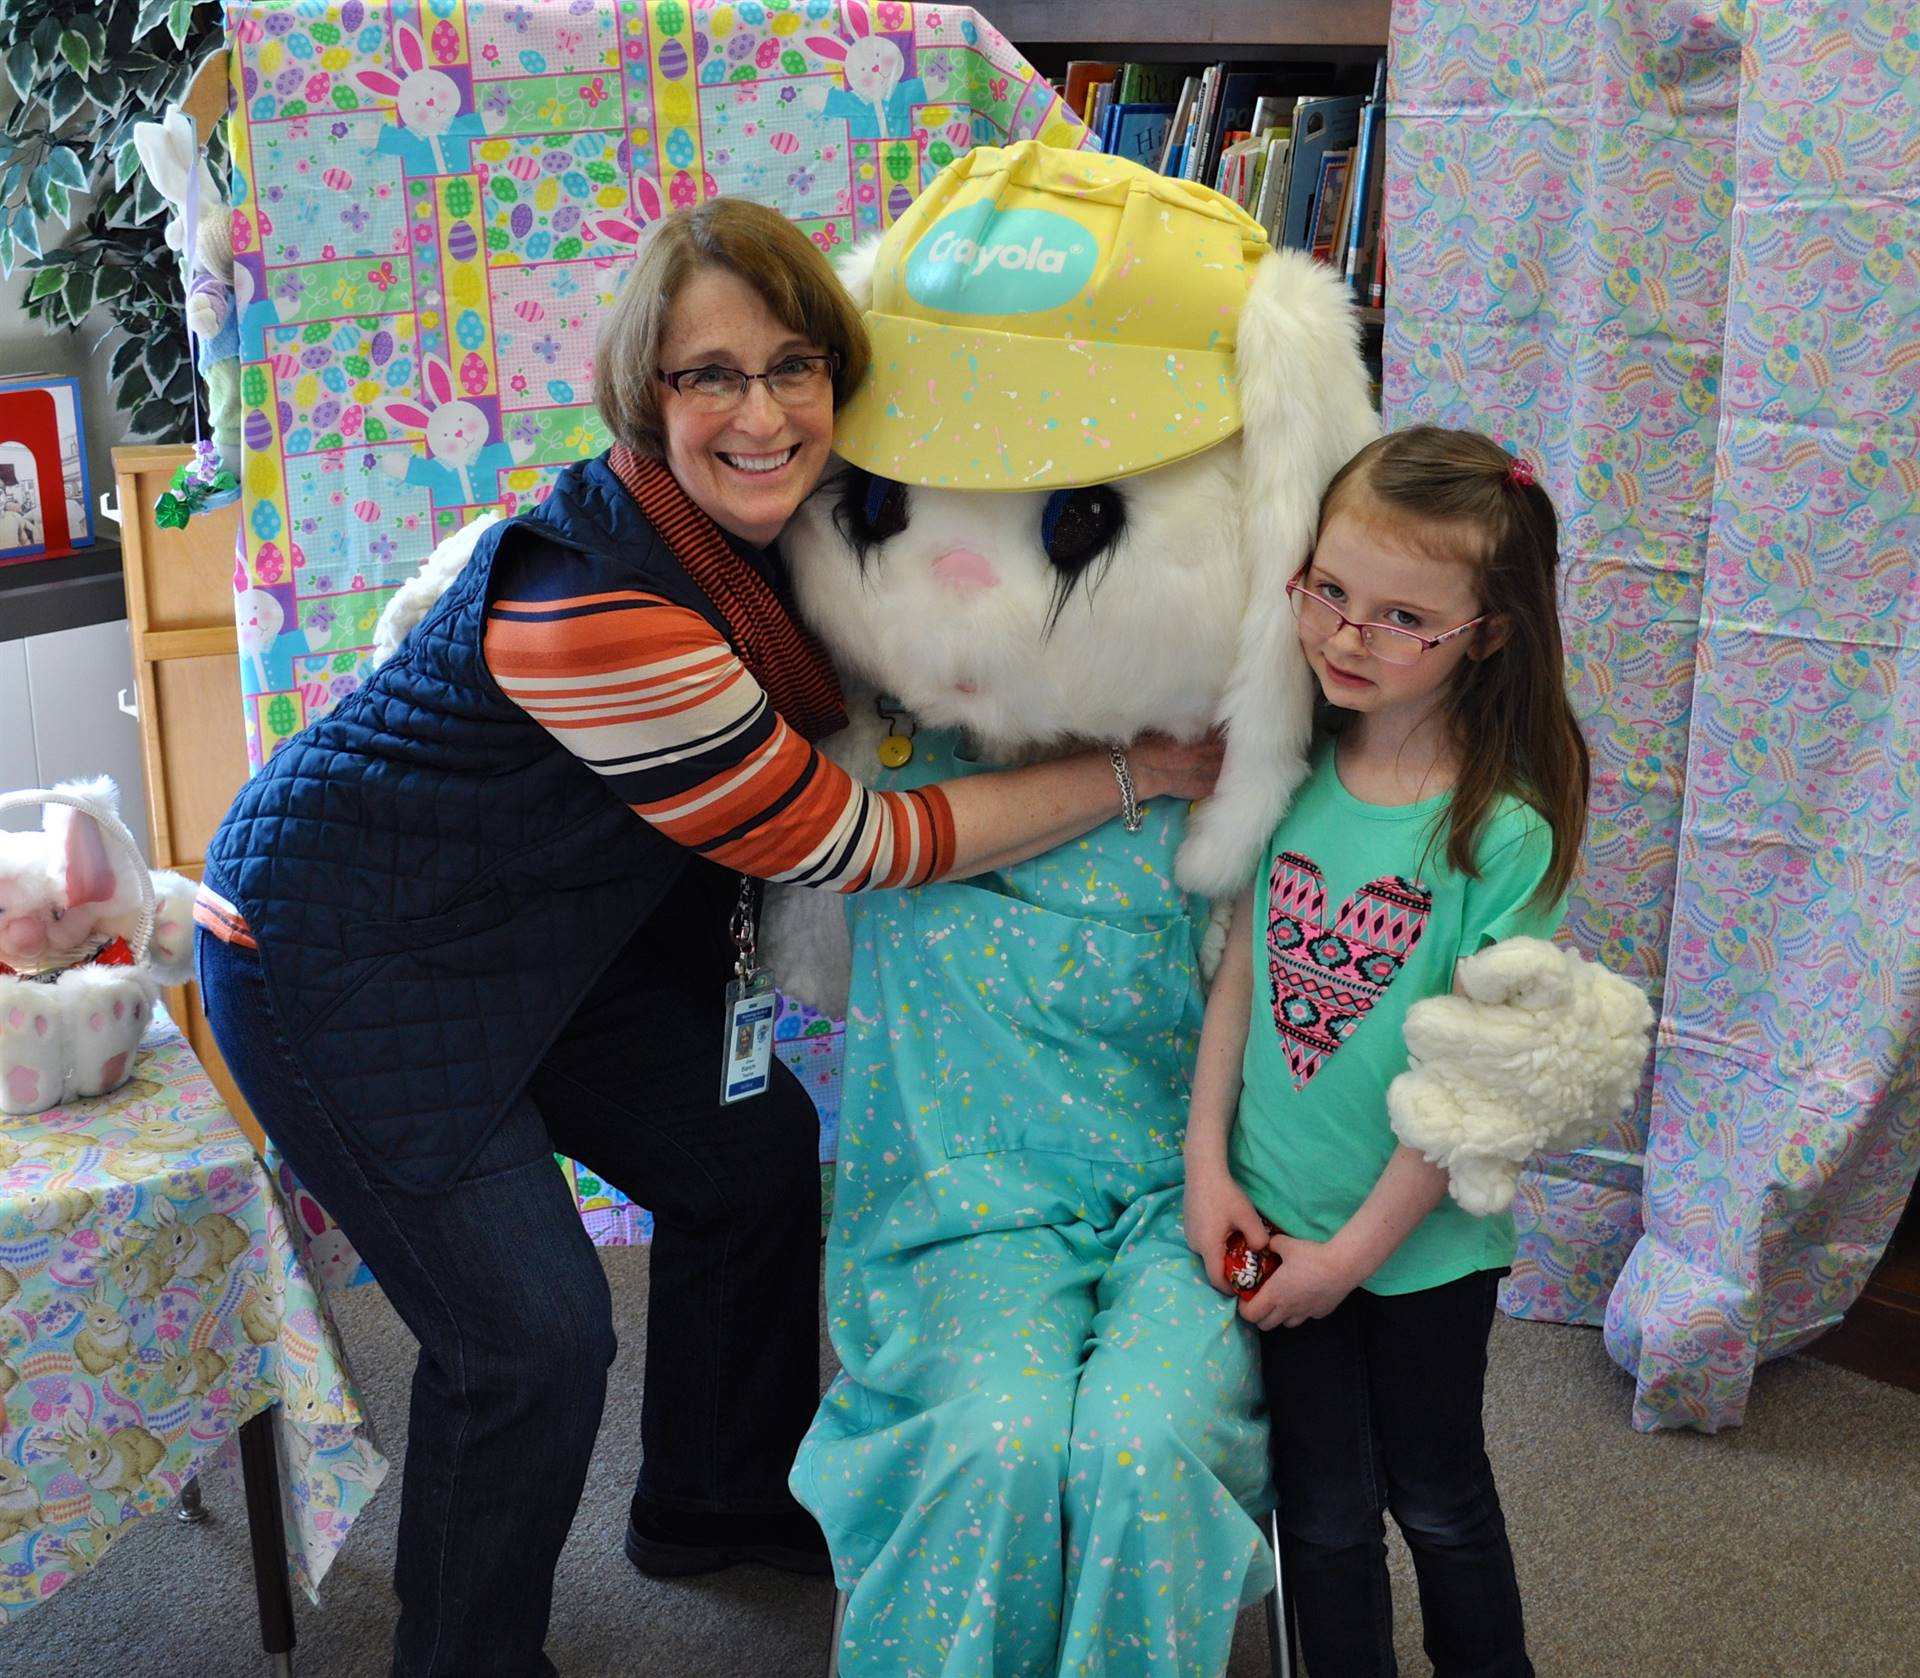 Mrs. Bianchi and student welcome Easter Bunny.